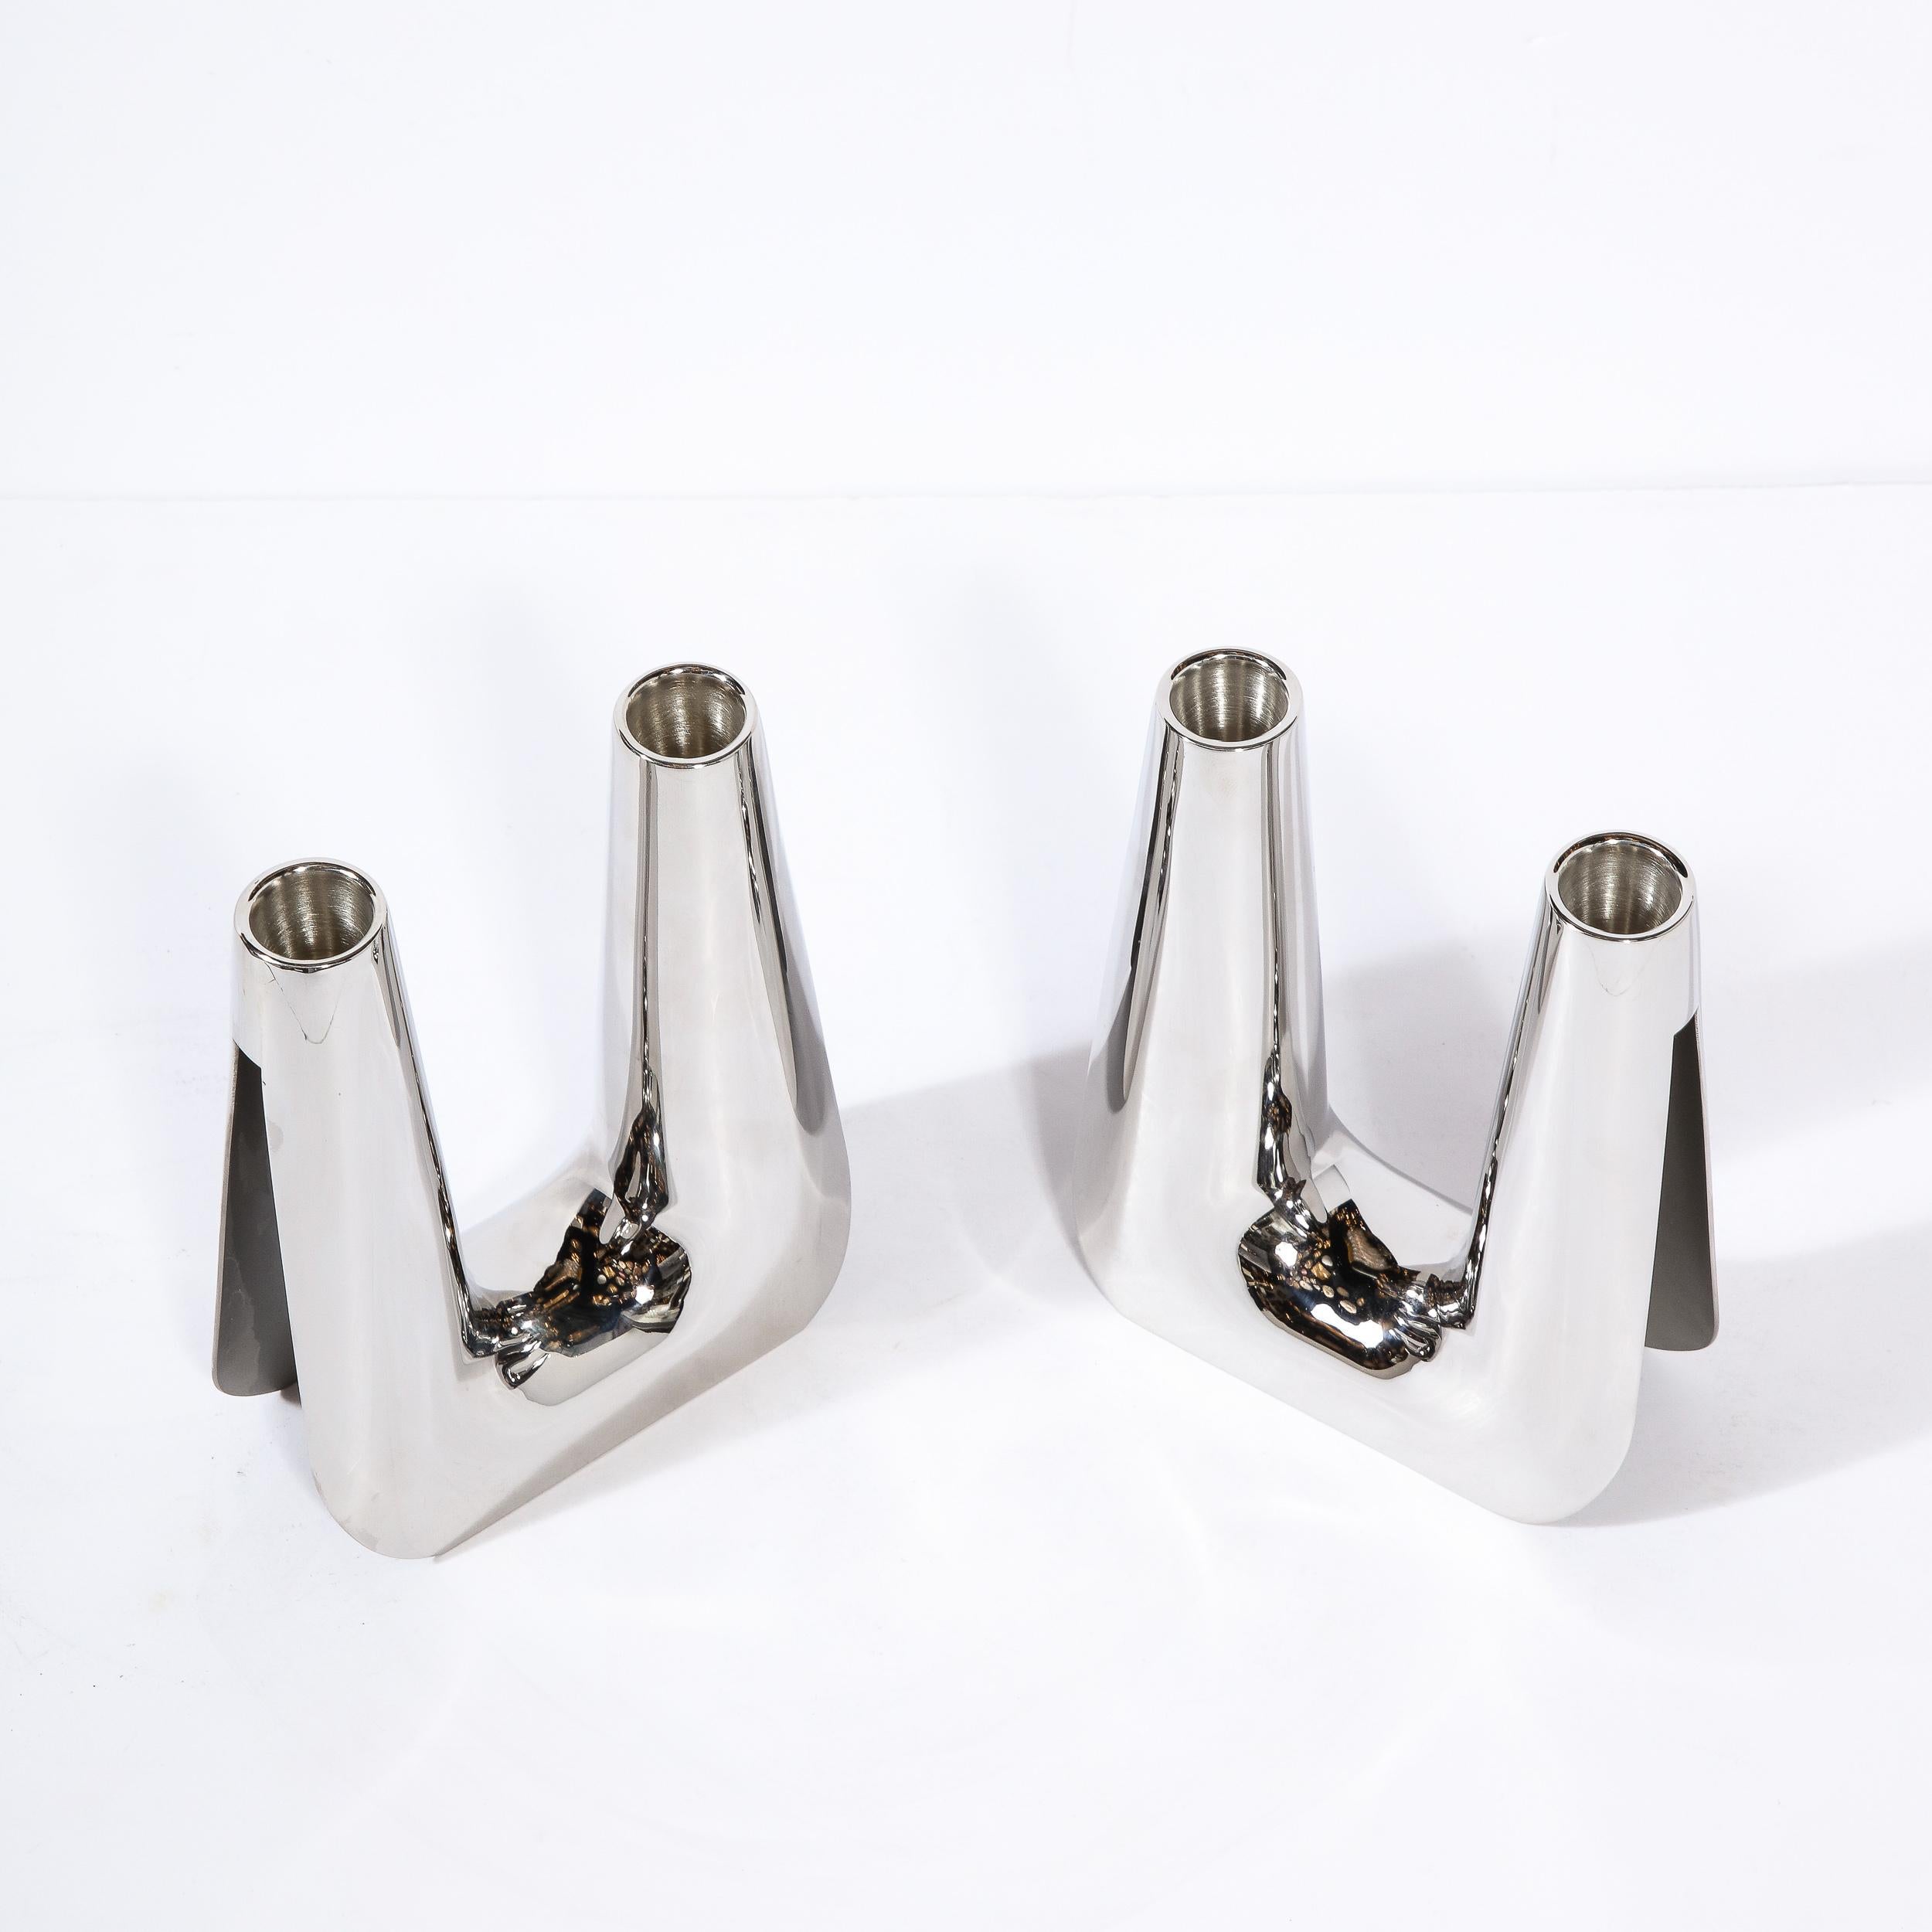 Pair of Valley Form Two Light Candelabras in Stainless Steel by Georg Jensen In Excellent Condition For Sale In New York, NY